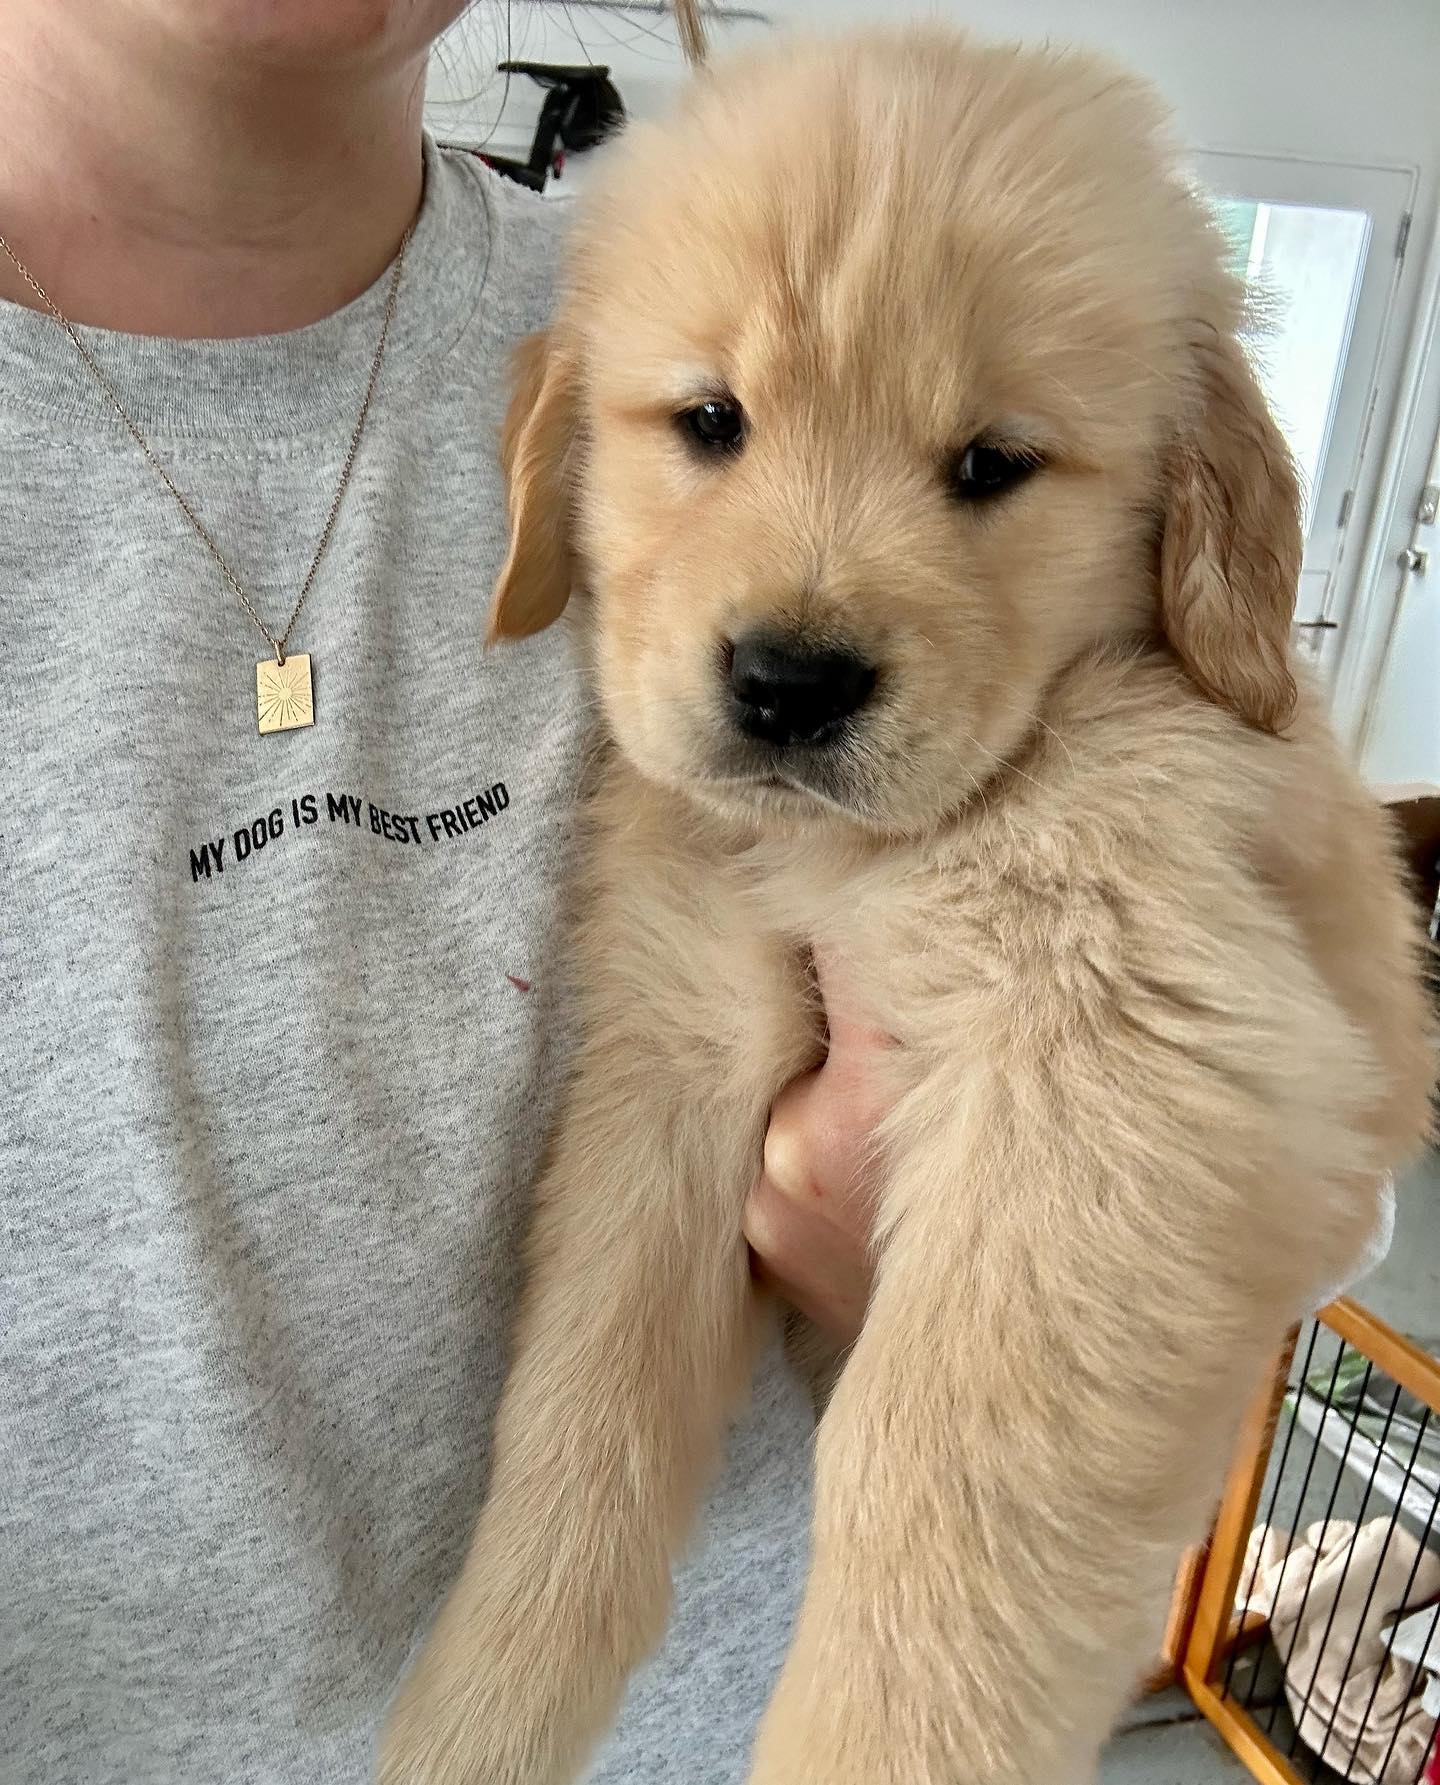 Golden retriever puppy in the arms of someone with a shirt that says 'My dog is my best friend'.